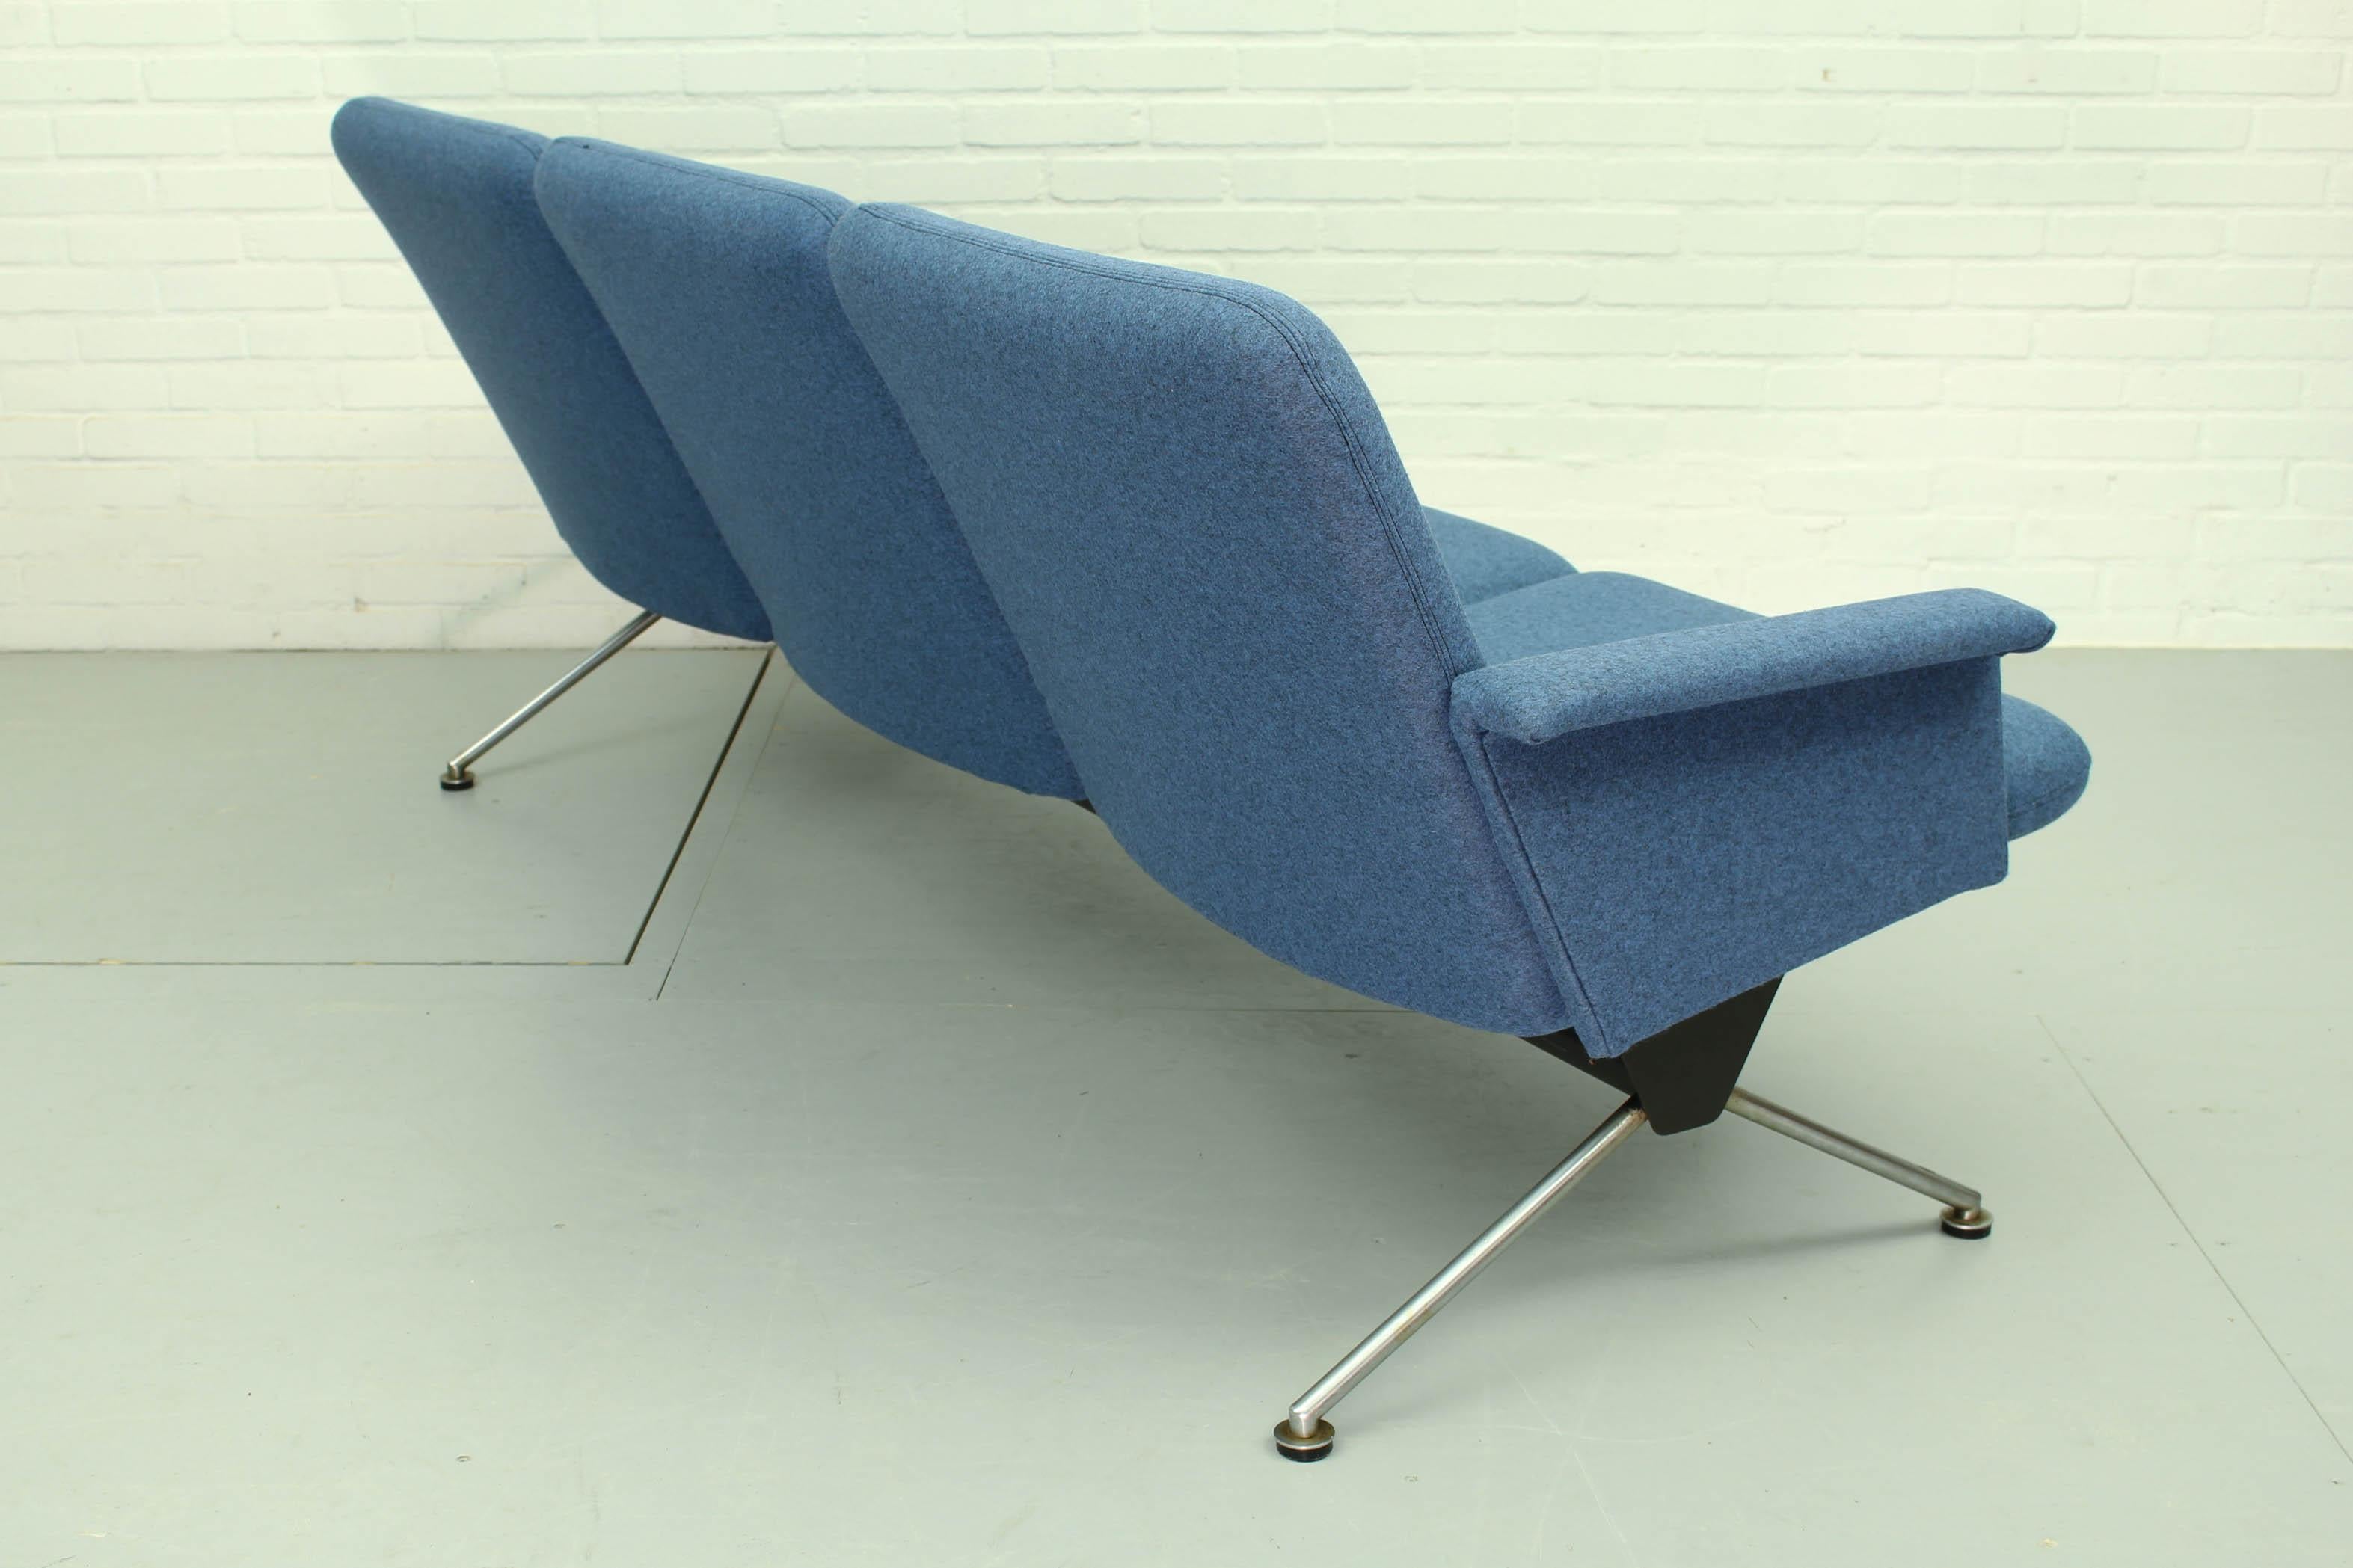 Dutch Lounge Set by Andre Cordemeyer for Gispen, 1432 '2x' and 1715, 1961